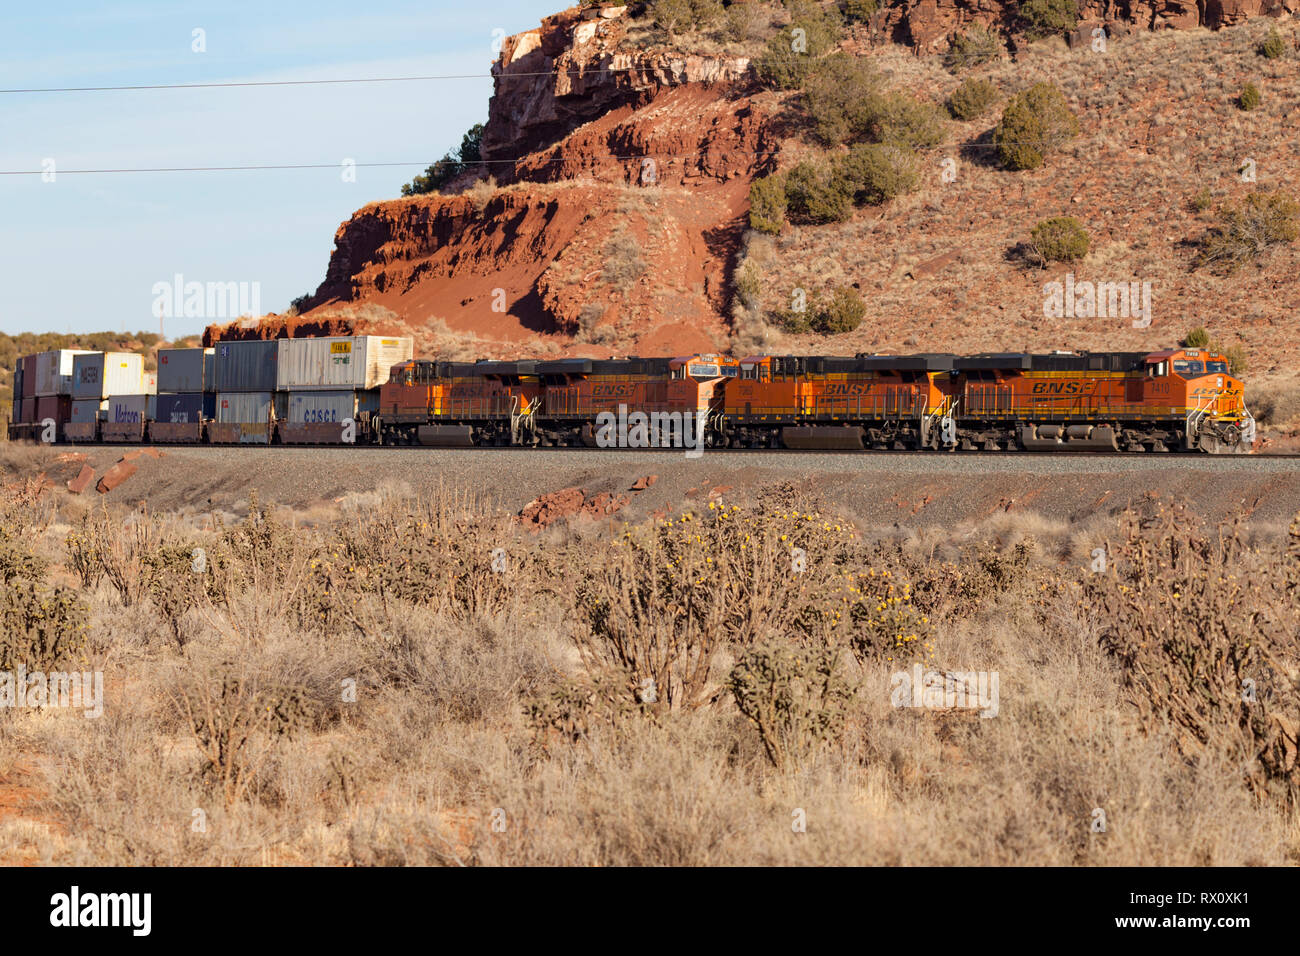 Double stacked freight train in New Mexico desert Stock Photo